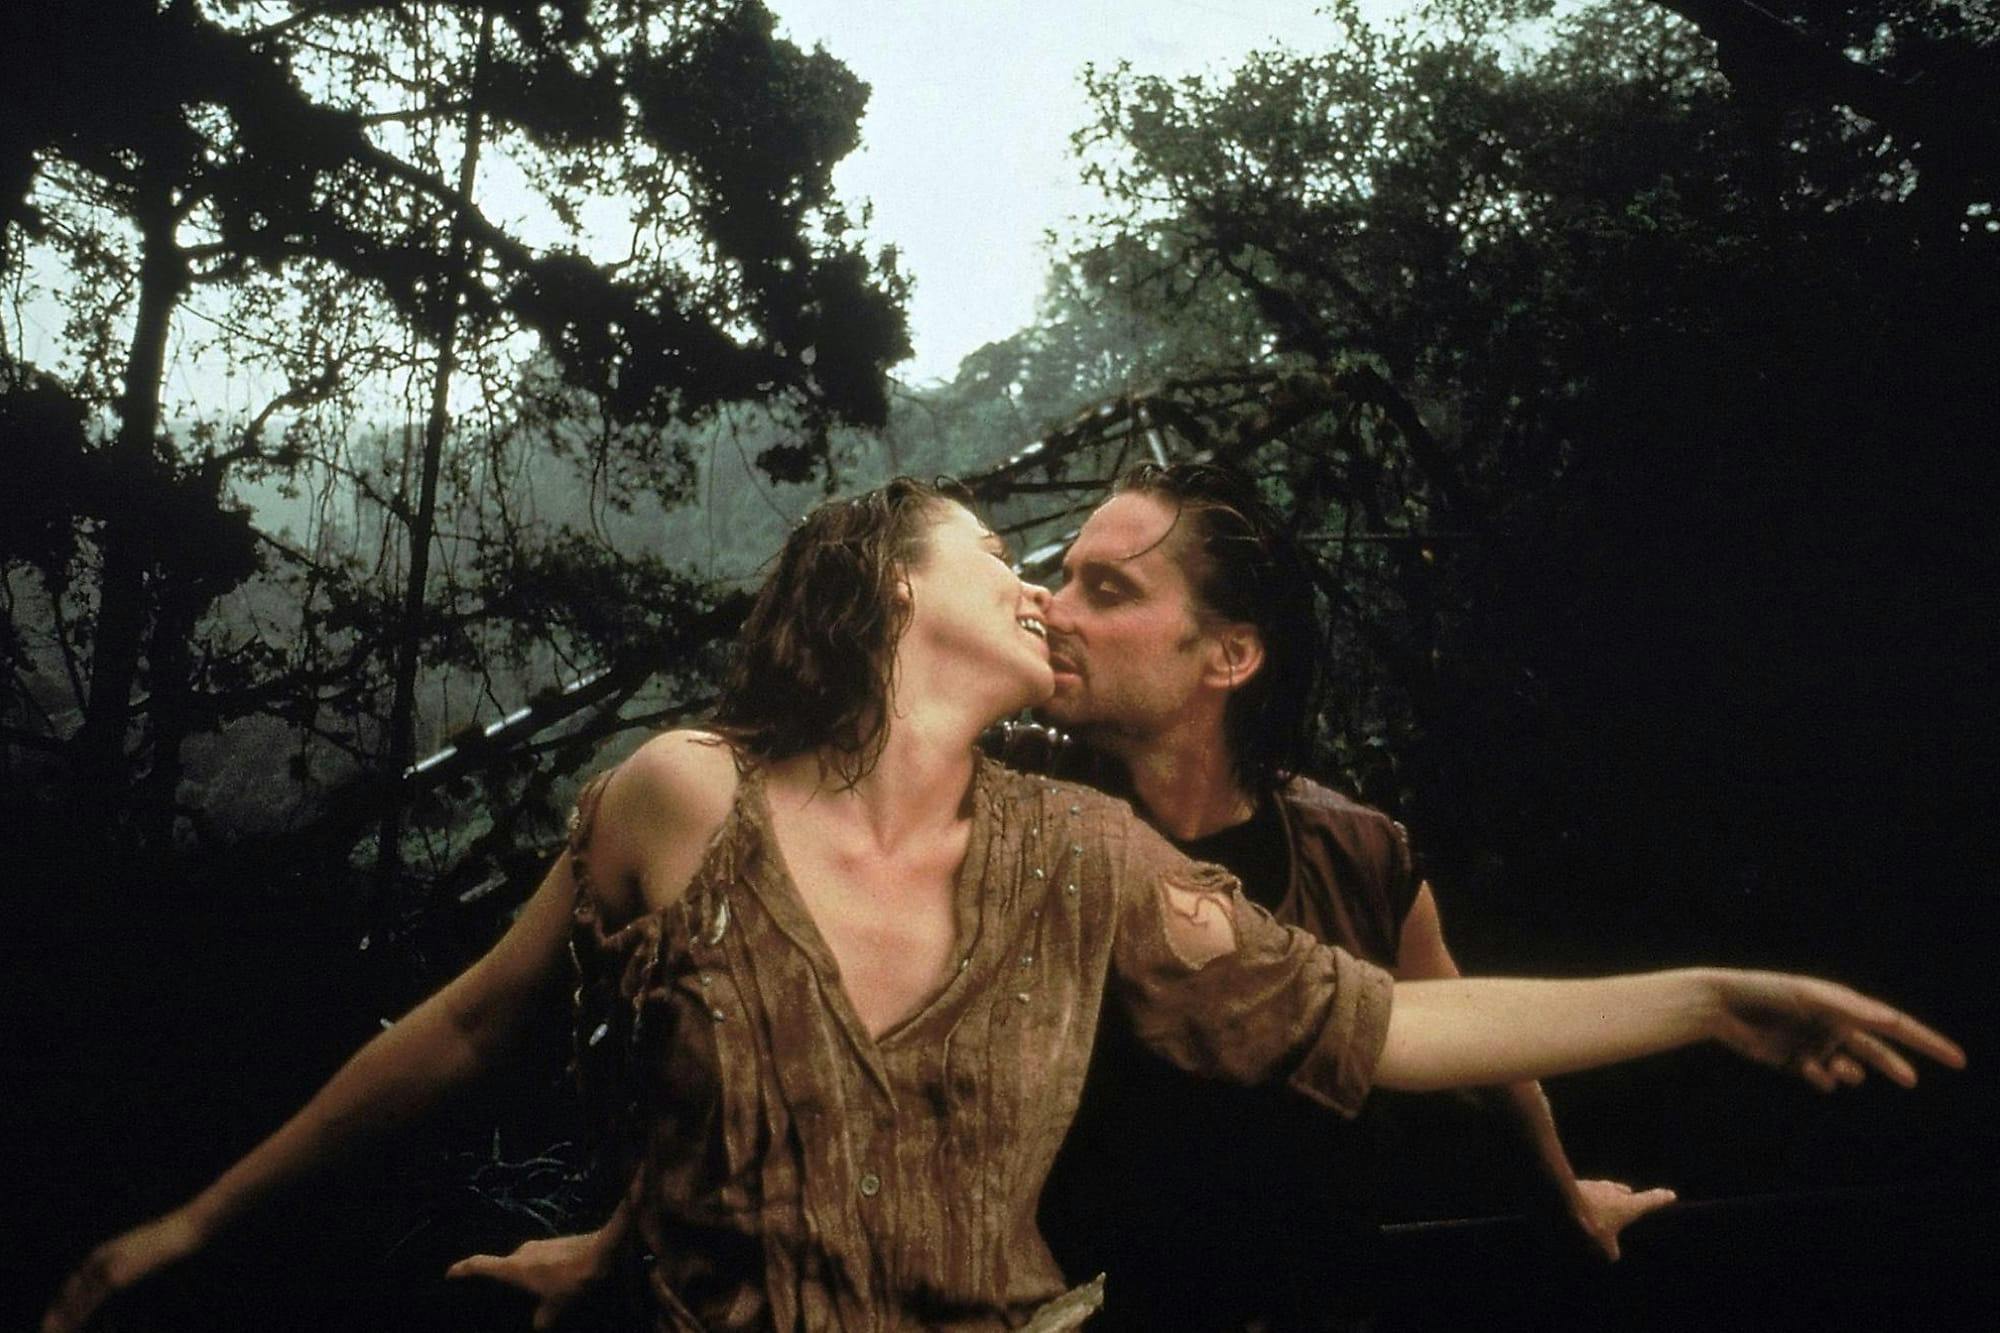 Joan Wilder (Kathleen Turner) and Jack T. Colton (Michael Douglas) in Romancing the Stone. The wear neutral clothing and embrace in the middle of the woods.